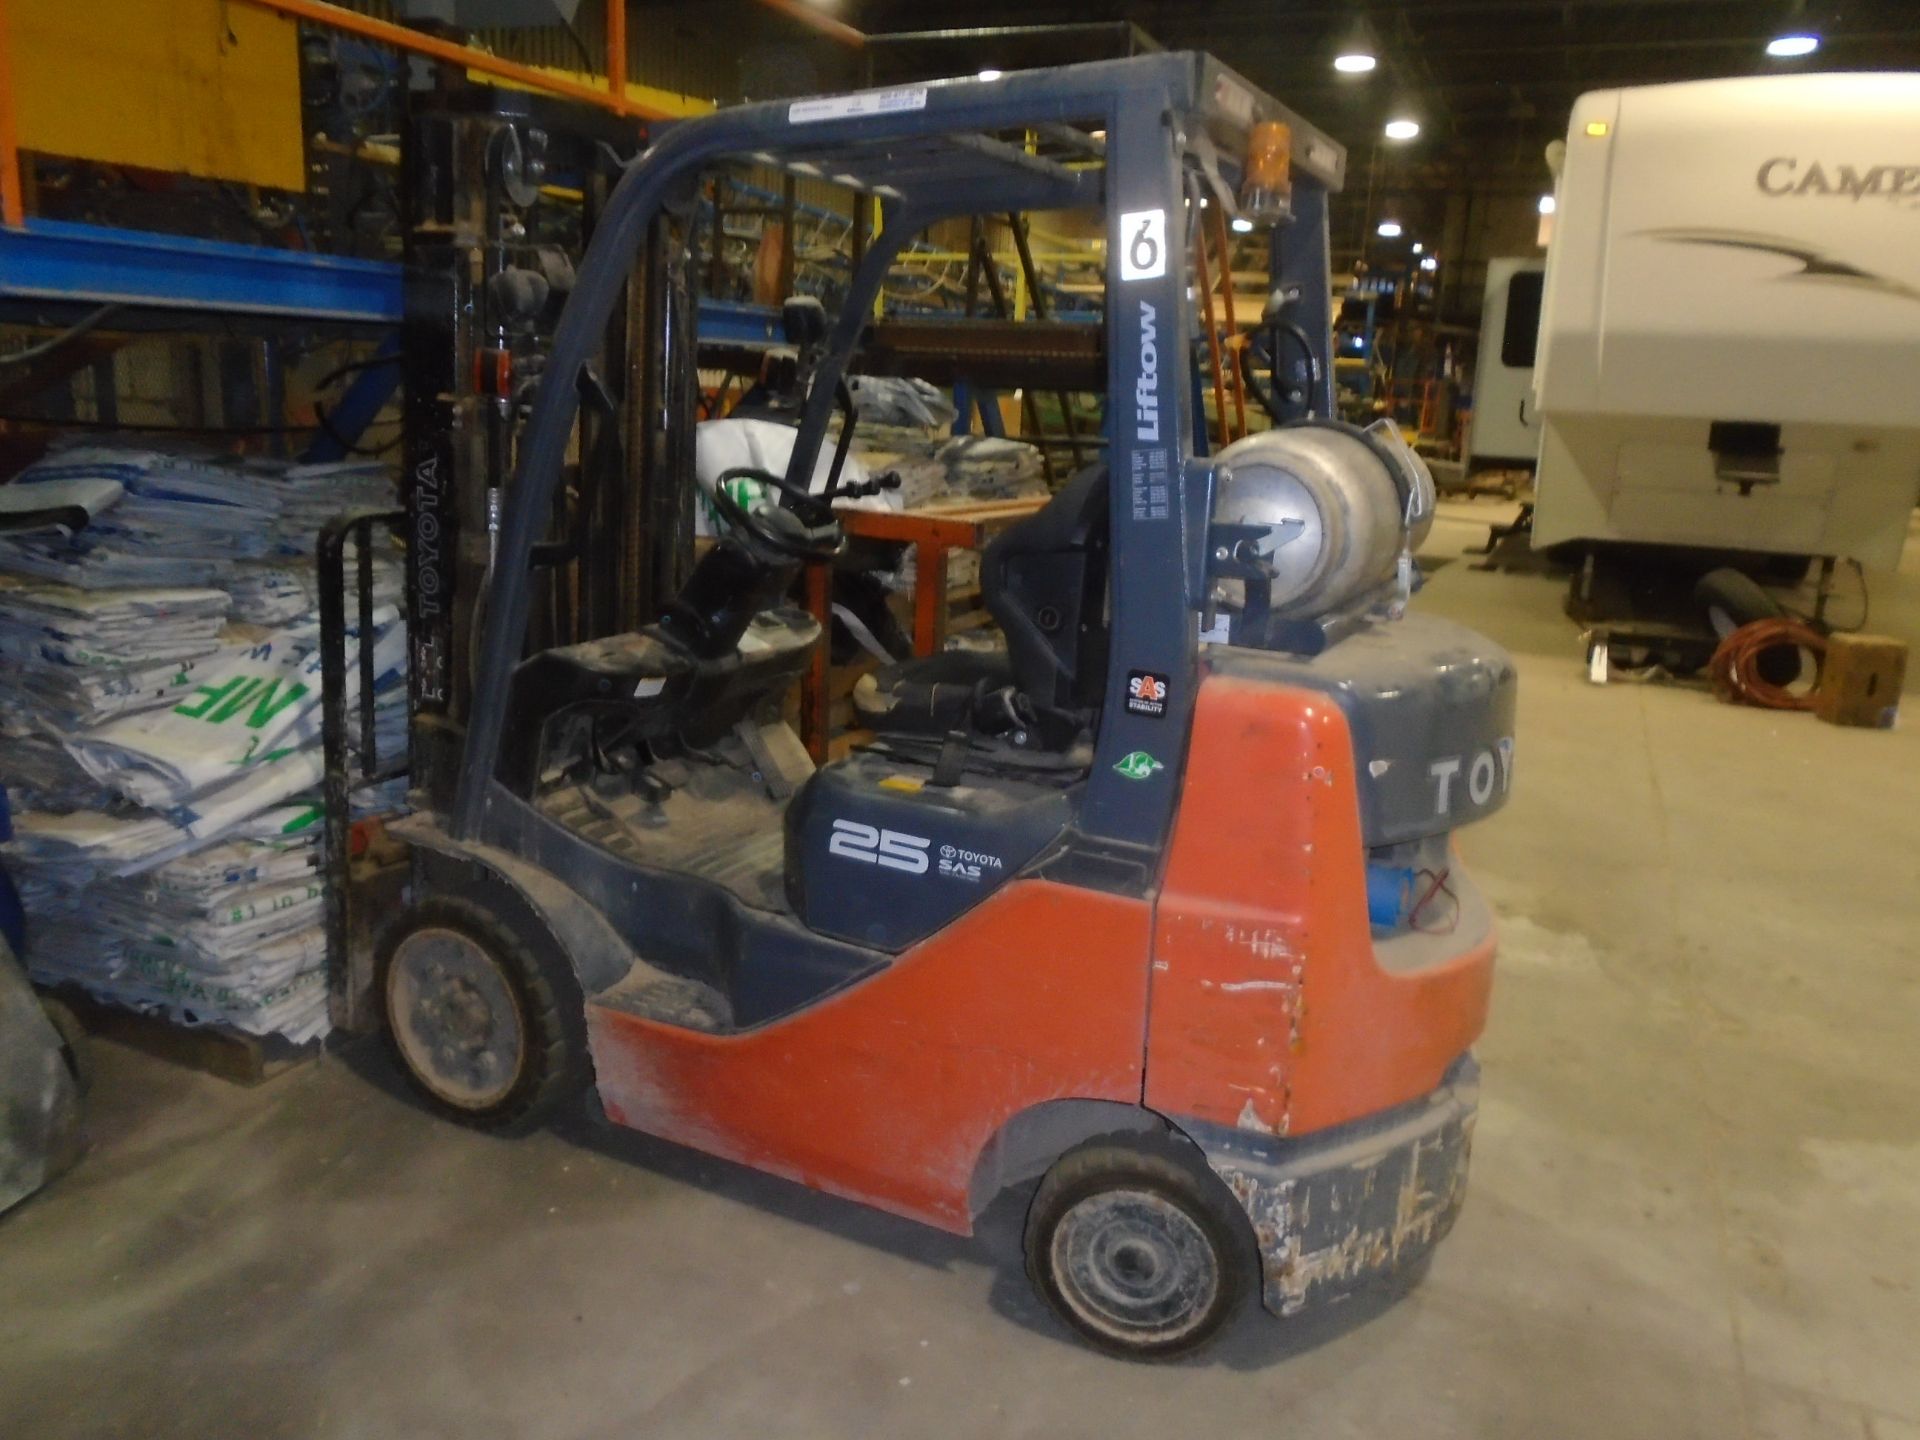 TOYOTA 8FGCU25 LPG FORKLIFT WITH 4500 LB. CAPACITY, 189" MAX. VERTICAL LIFT, SIDE SHIFT, CUSHION